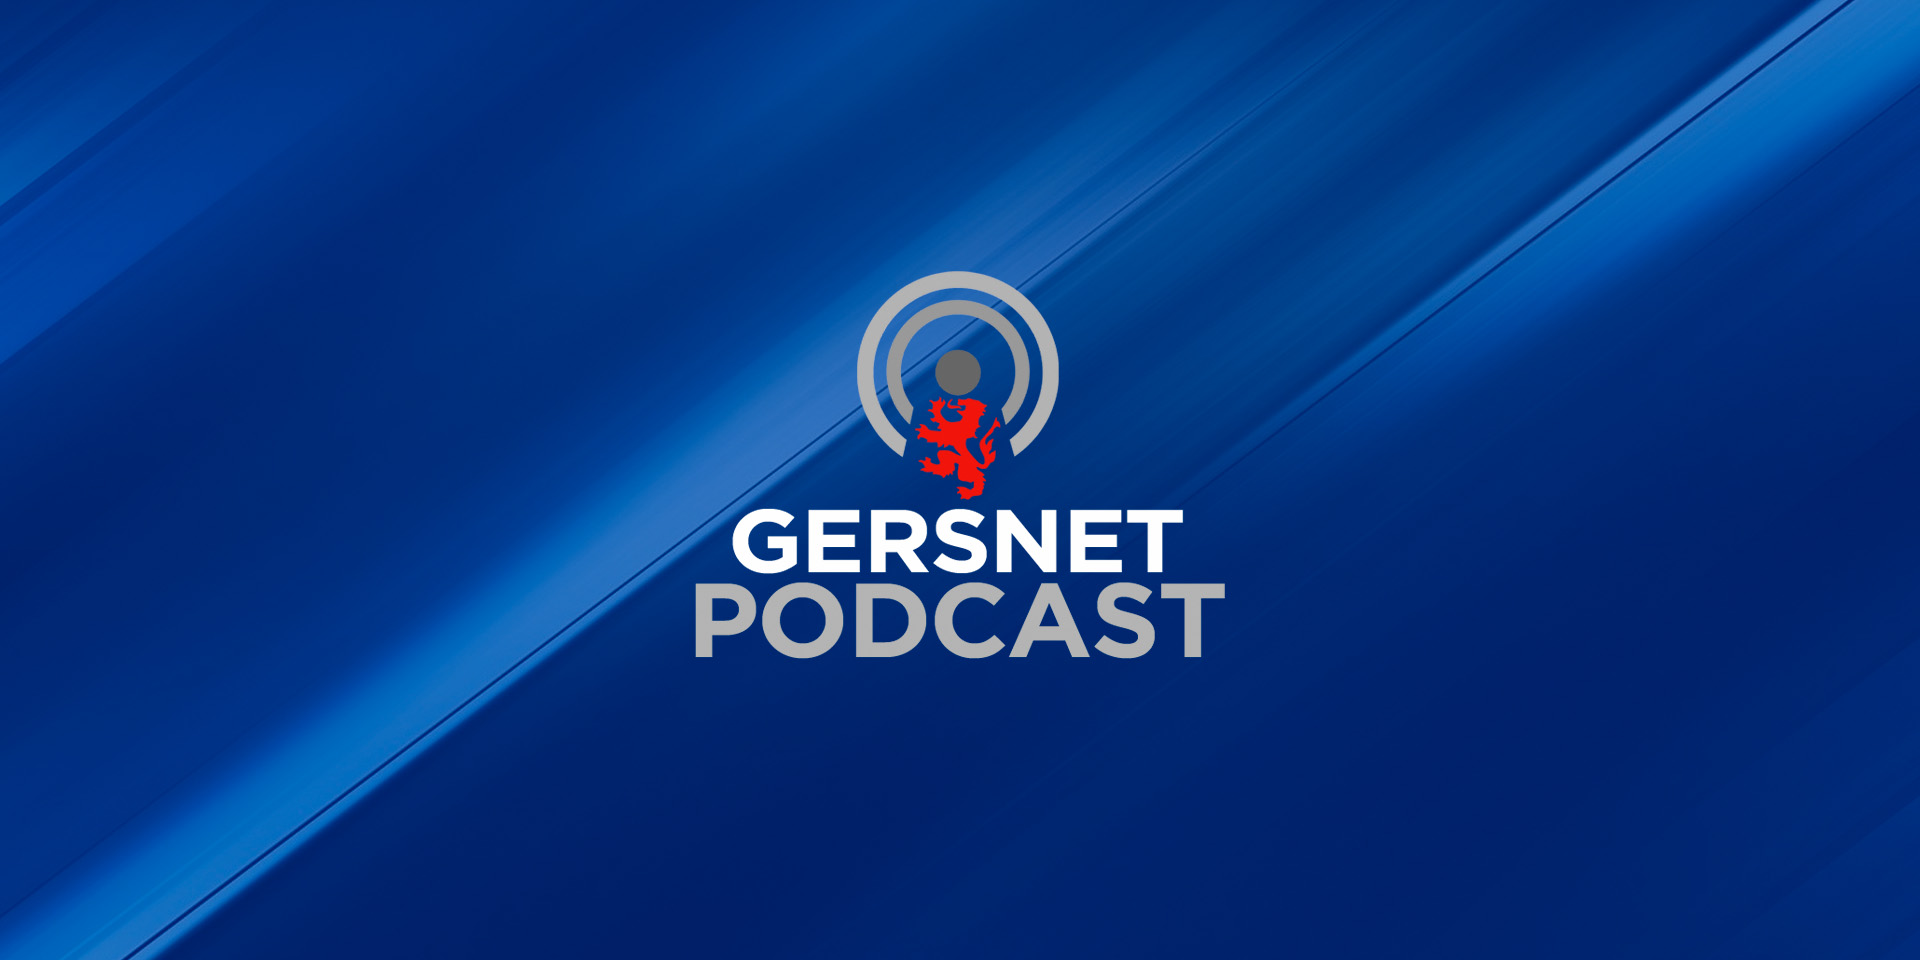 Gersnet Podcast 215 - Ending on a low